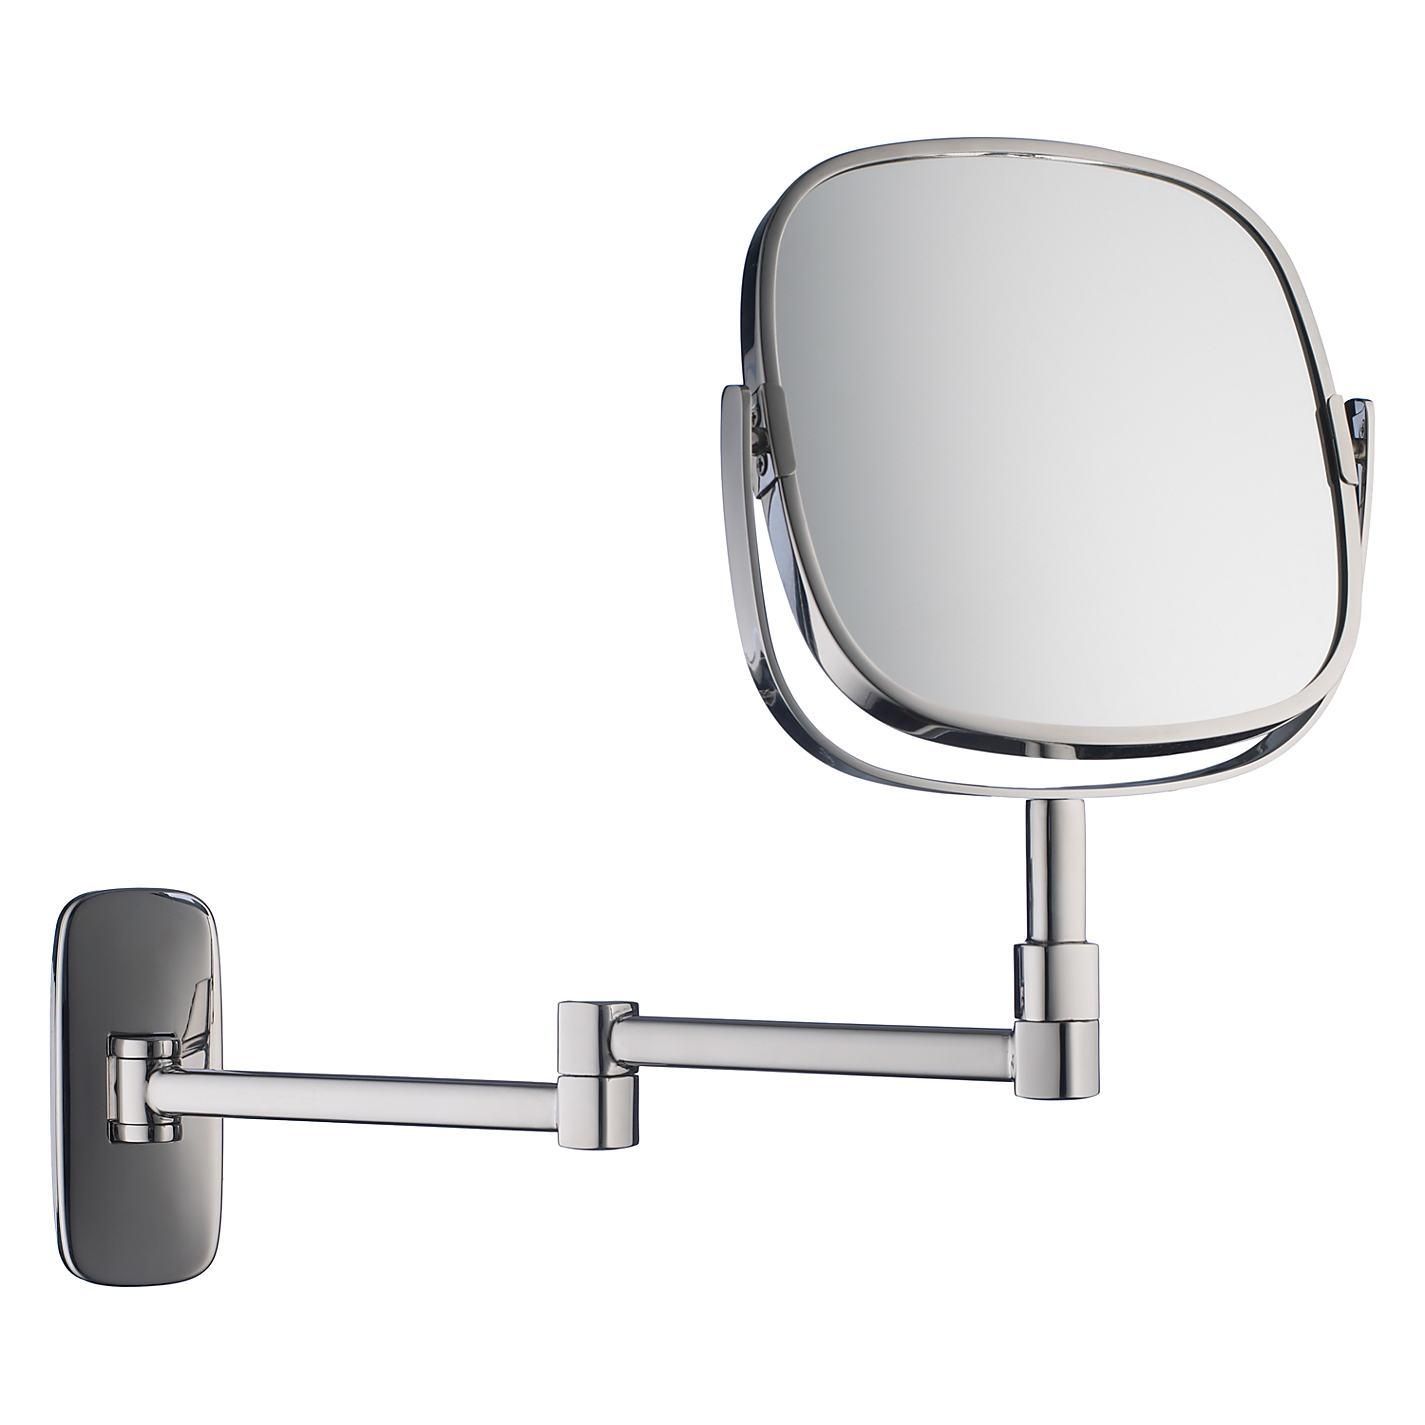 Bathroom Cabinets : Inspirational Bathroom Mirrors Magnifying Wall Within Adjustable Bathroom Mirrors (View 1 of 20)